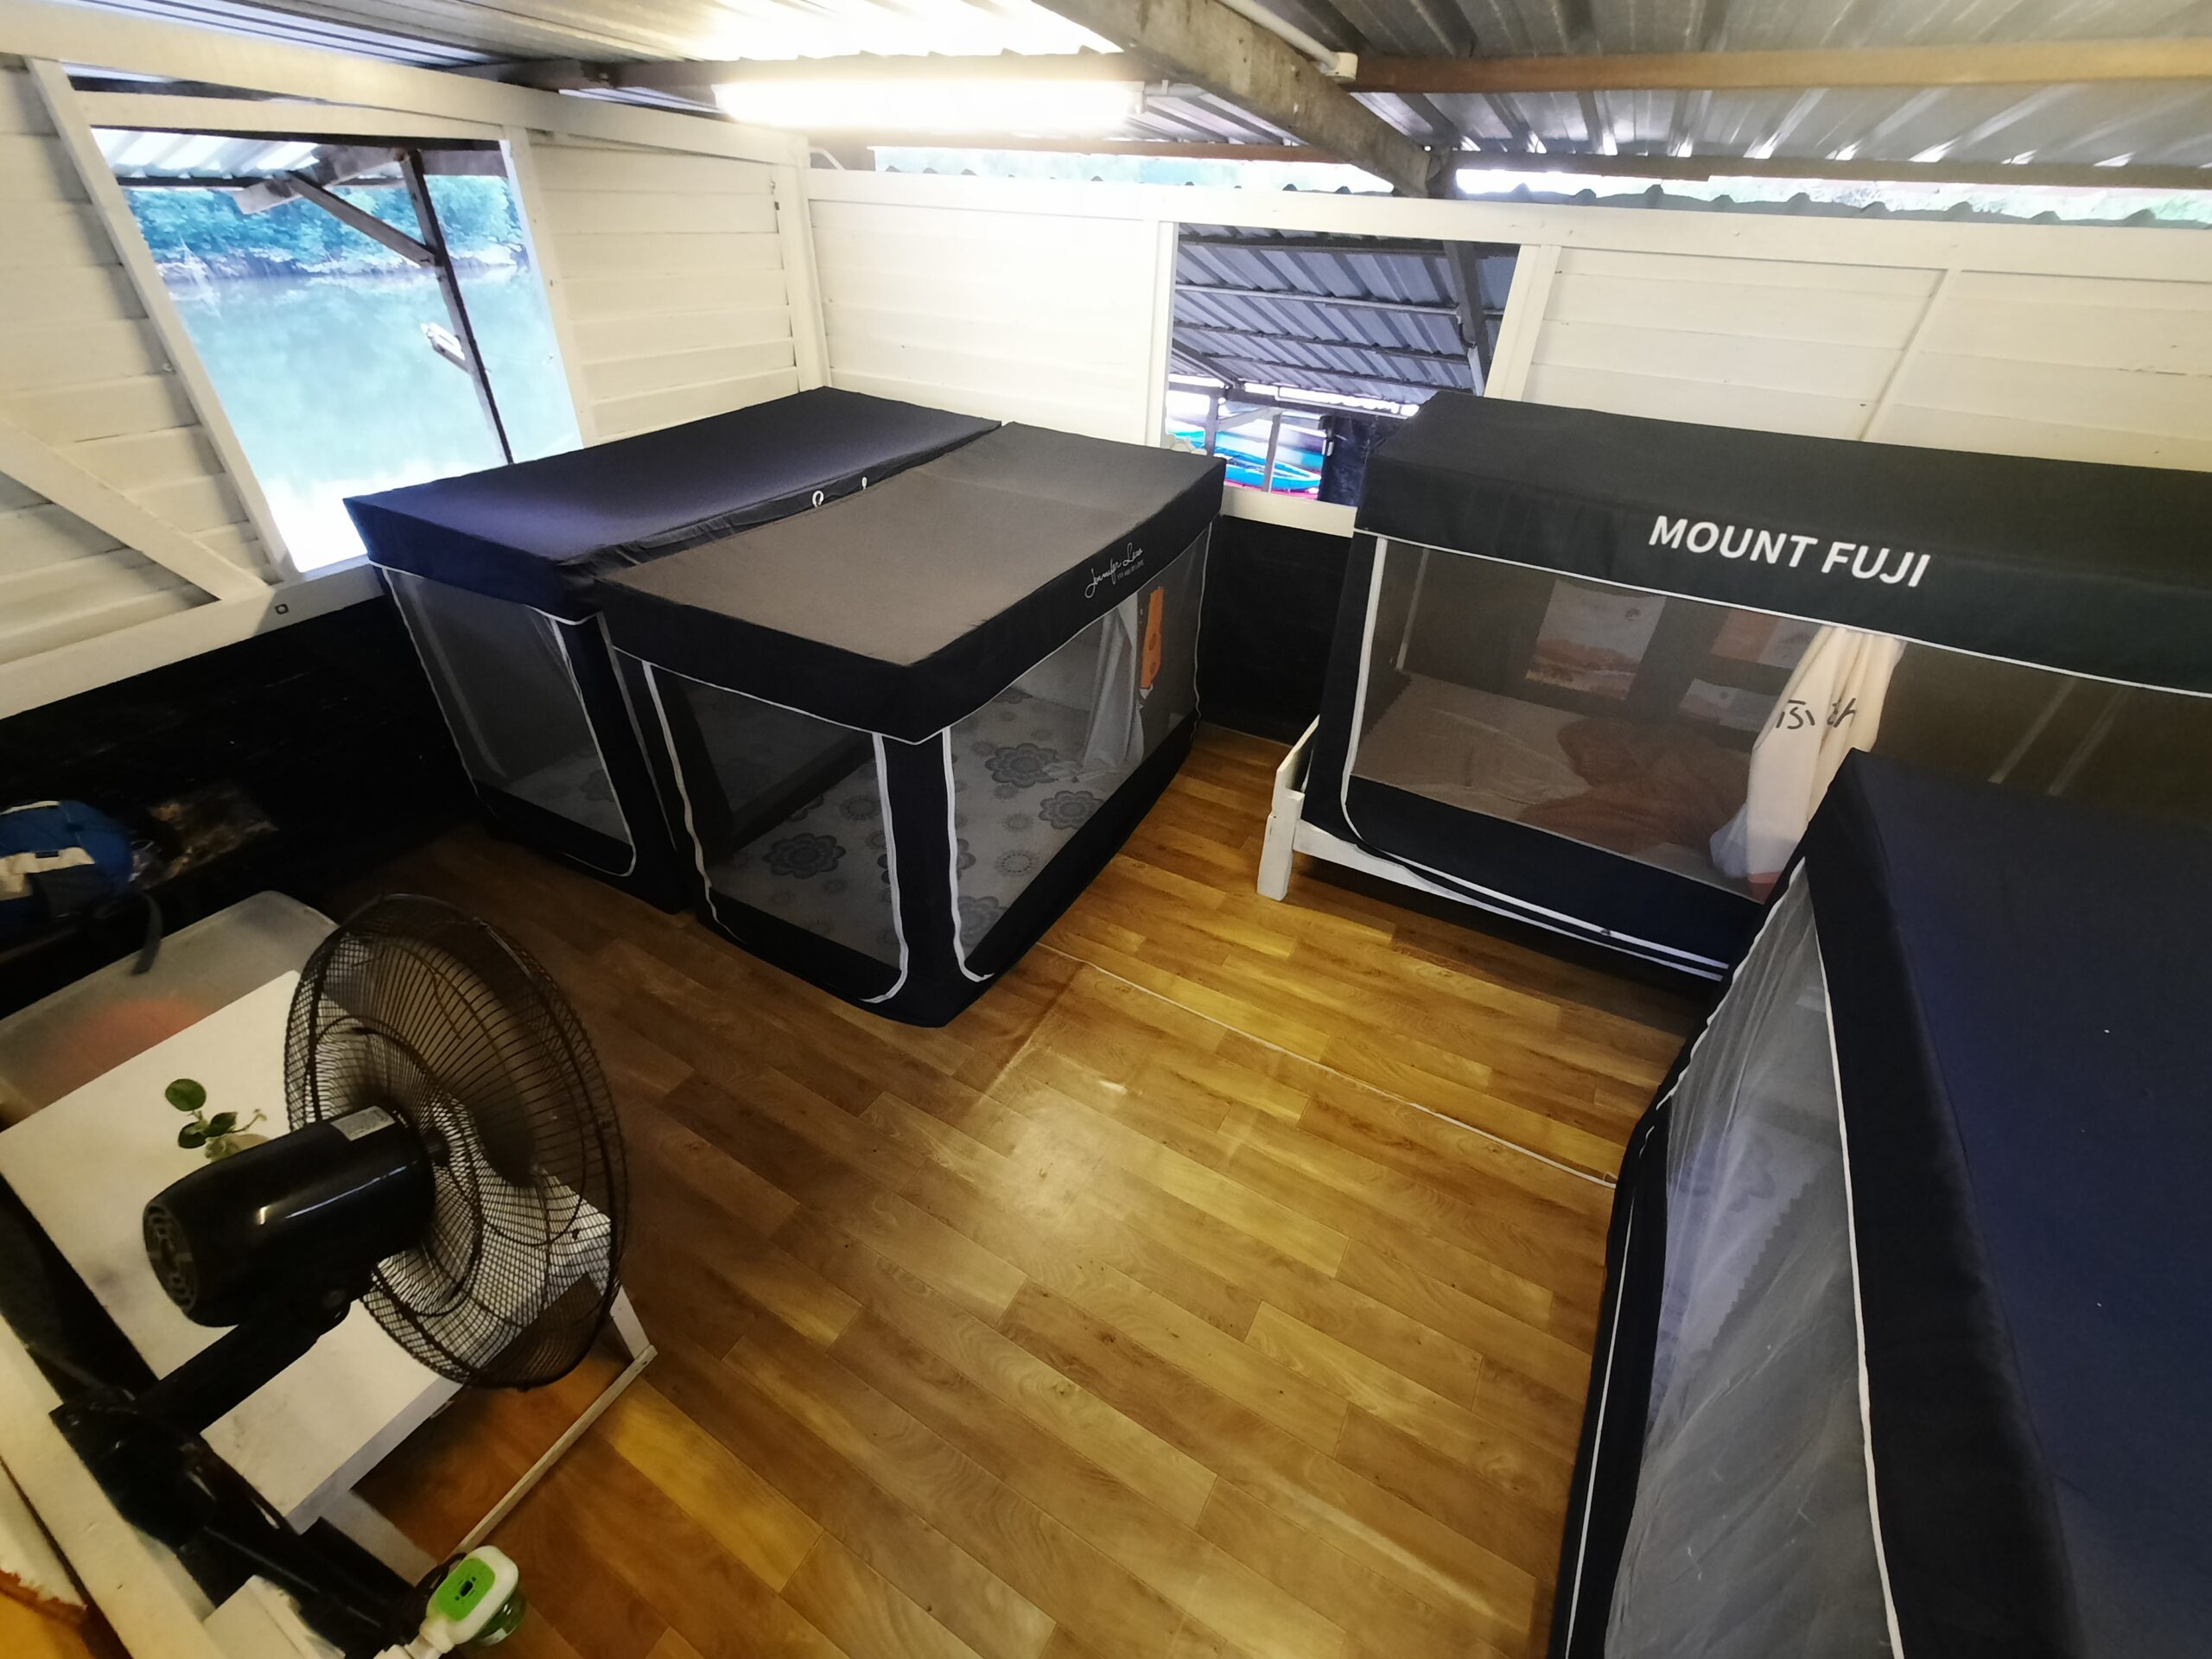 Private room with 4 POD Beds for a weekend getaway